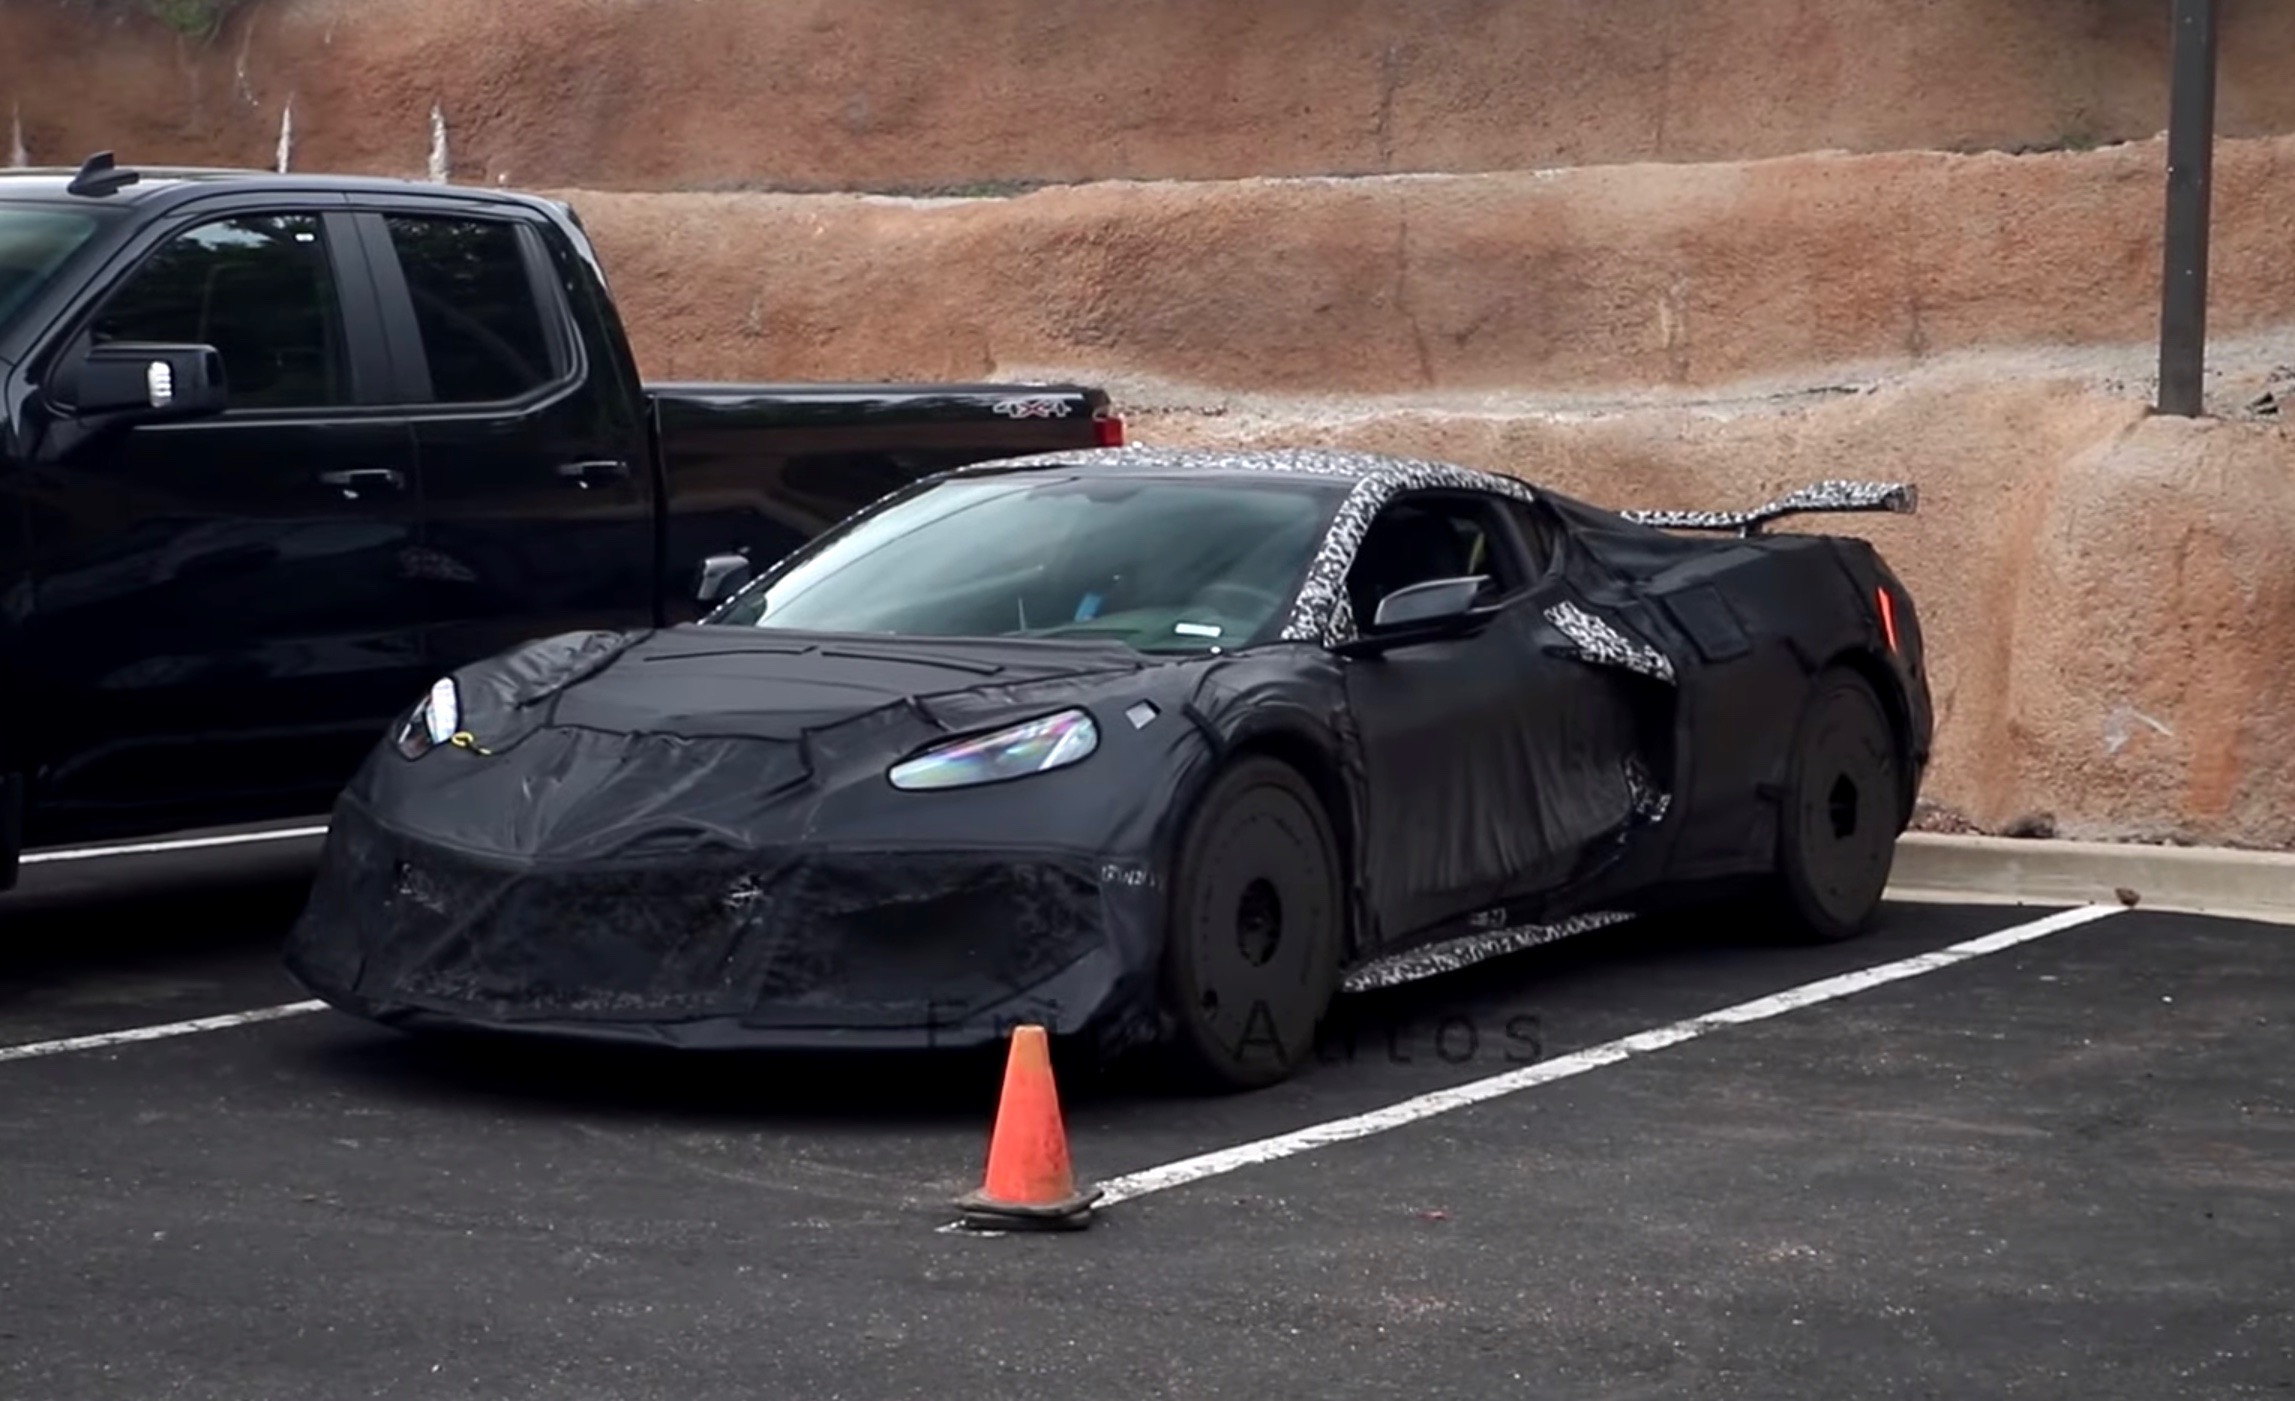 Corvette ZR1 prototype spotted testing, to debut turbocharged V8